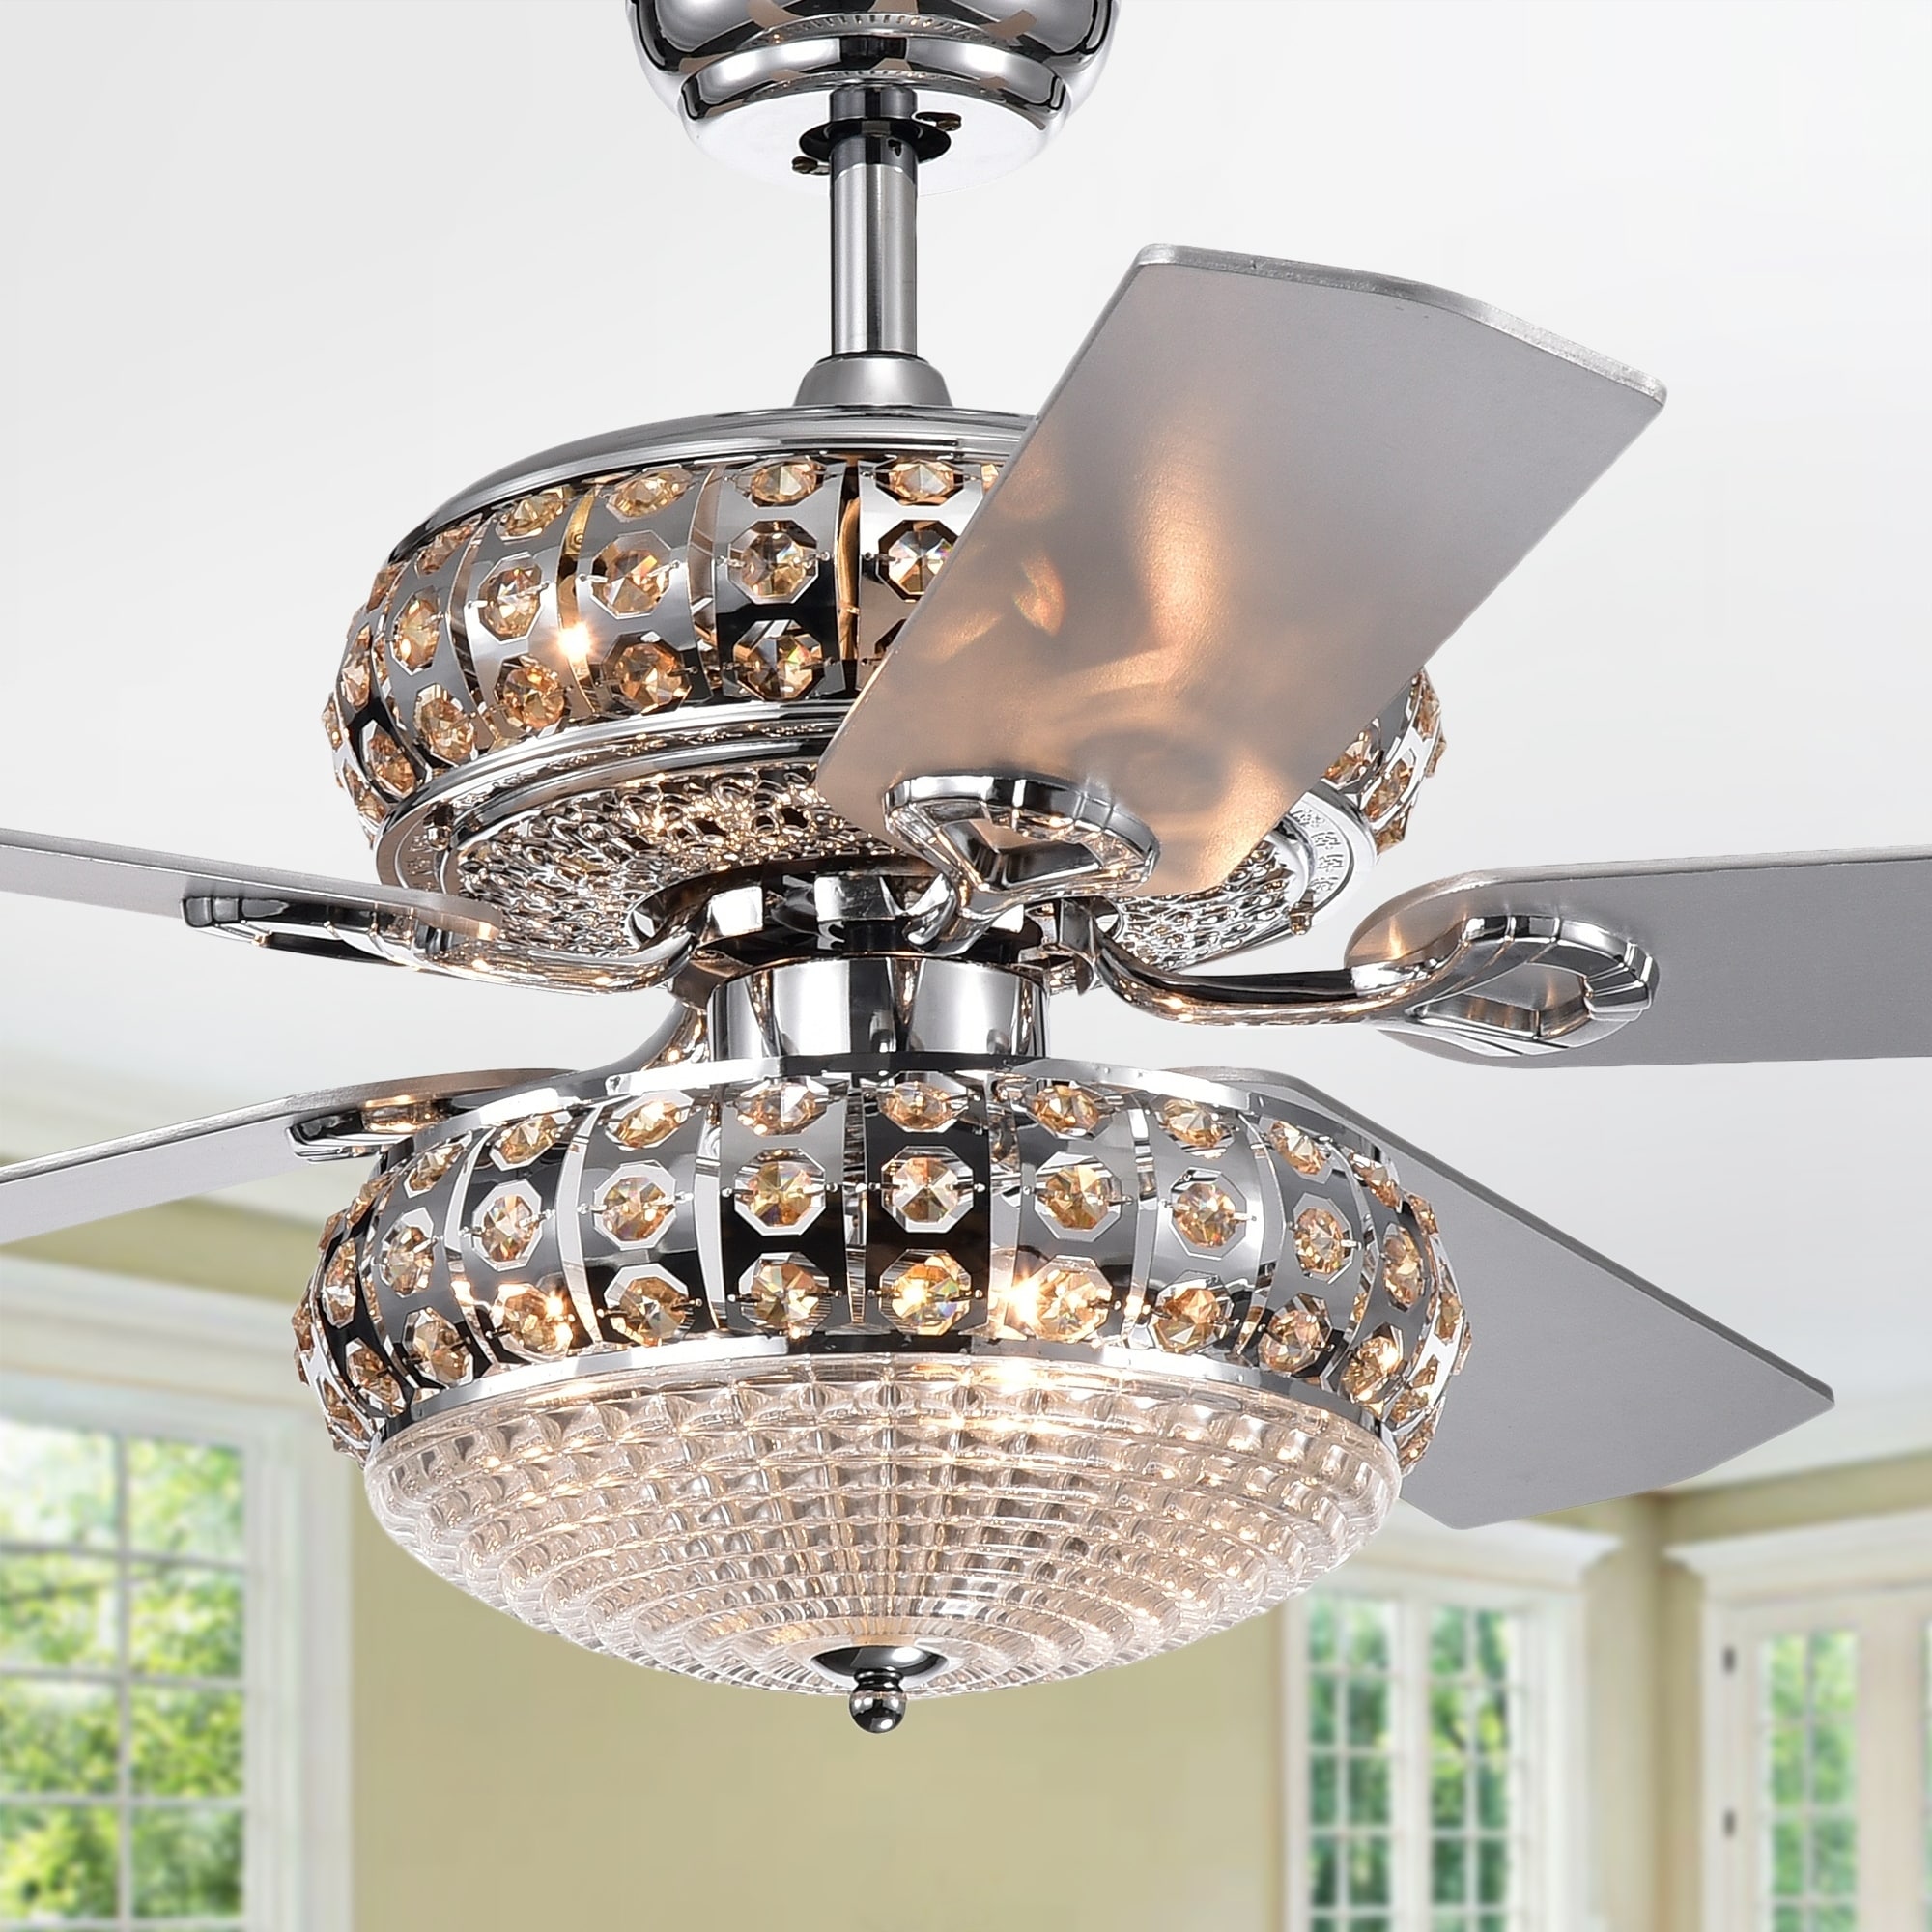 Shop Becsdale Dual Lamp 52 Inch 5 Blade Lighted Ceiling Fan With